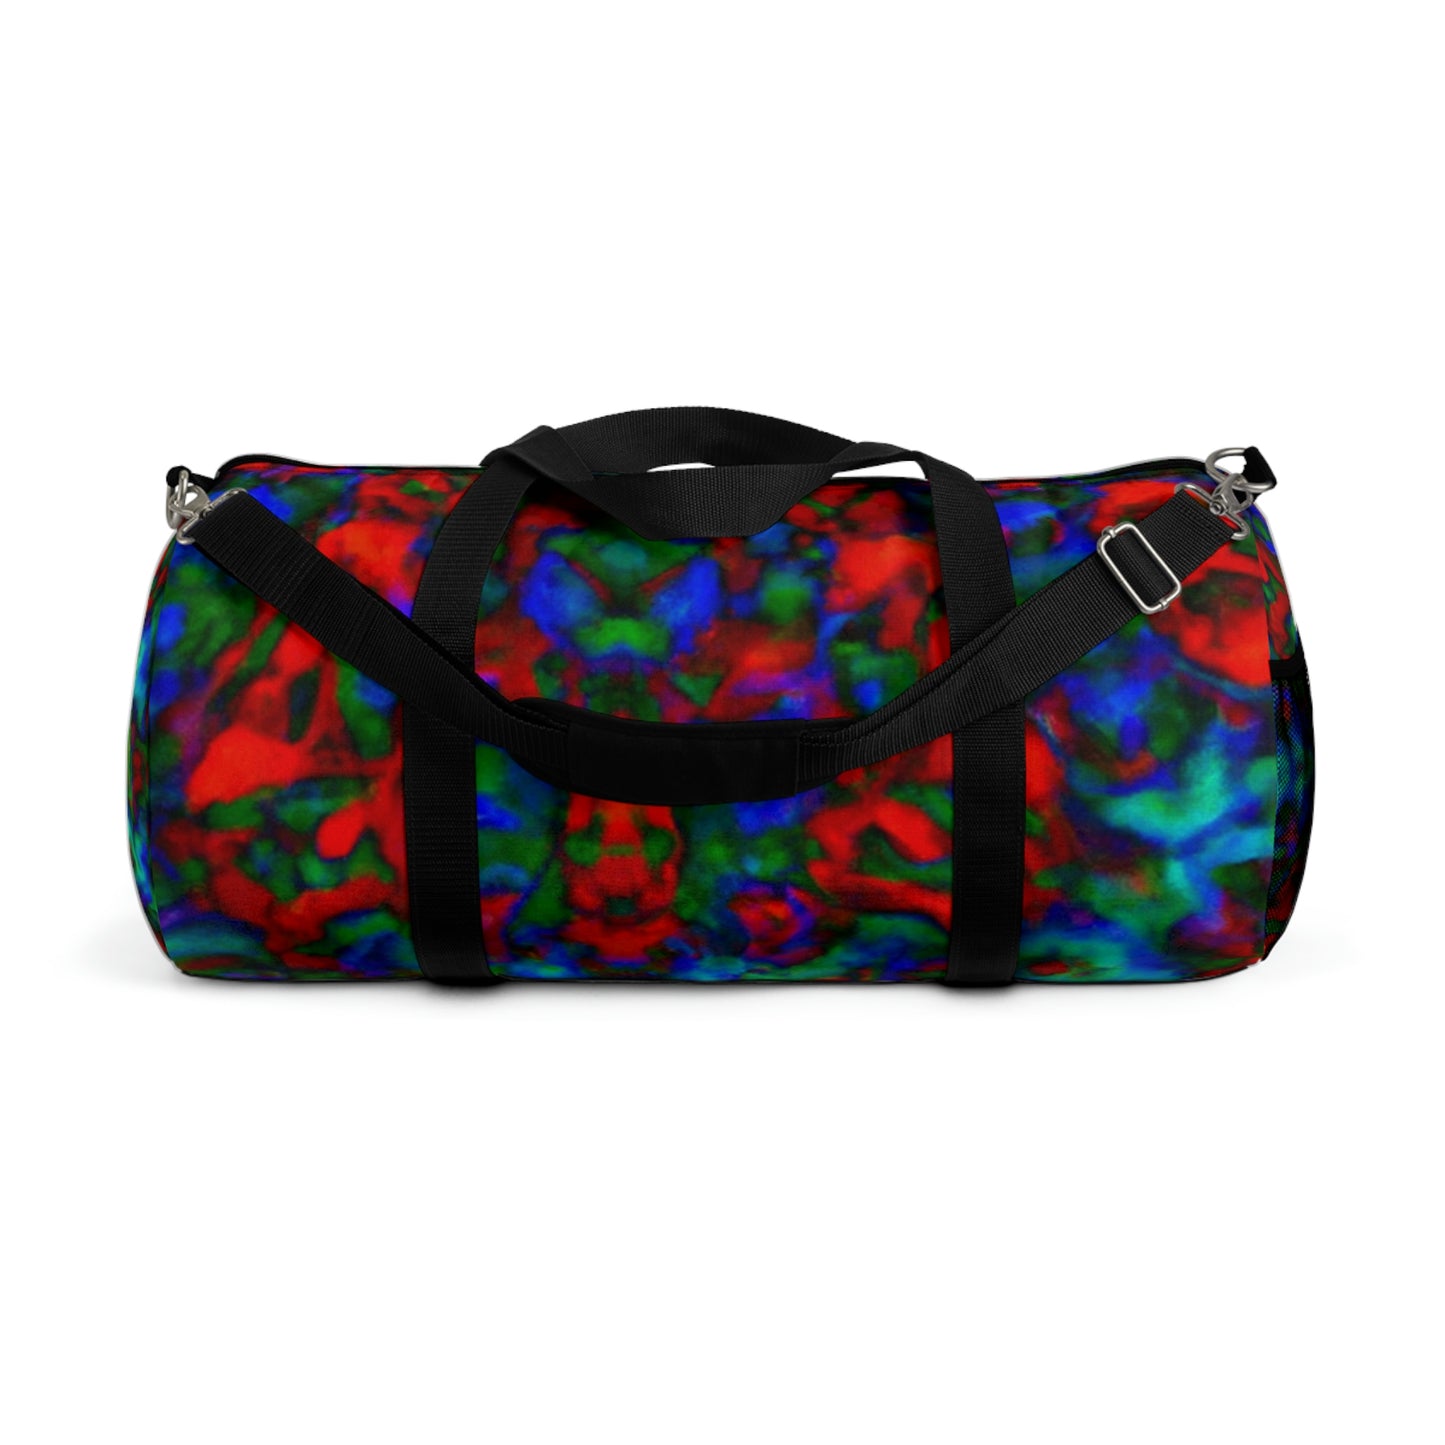 Aloise Luxe - Psychedelic Duffel Bag